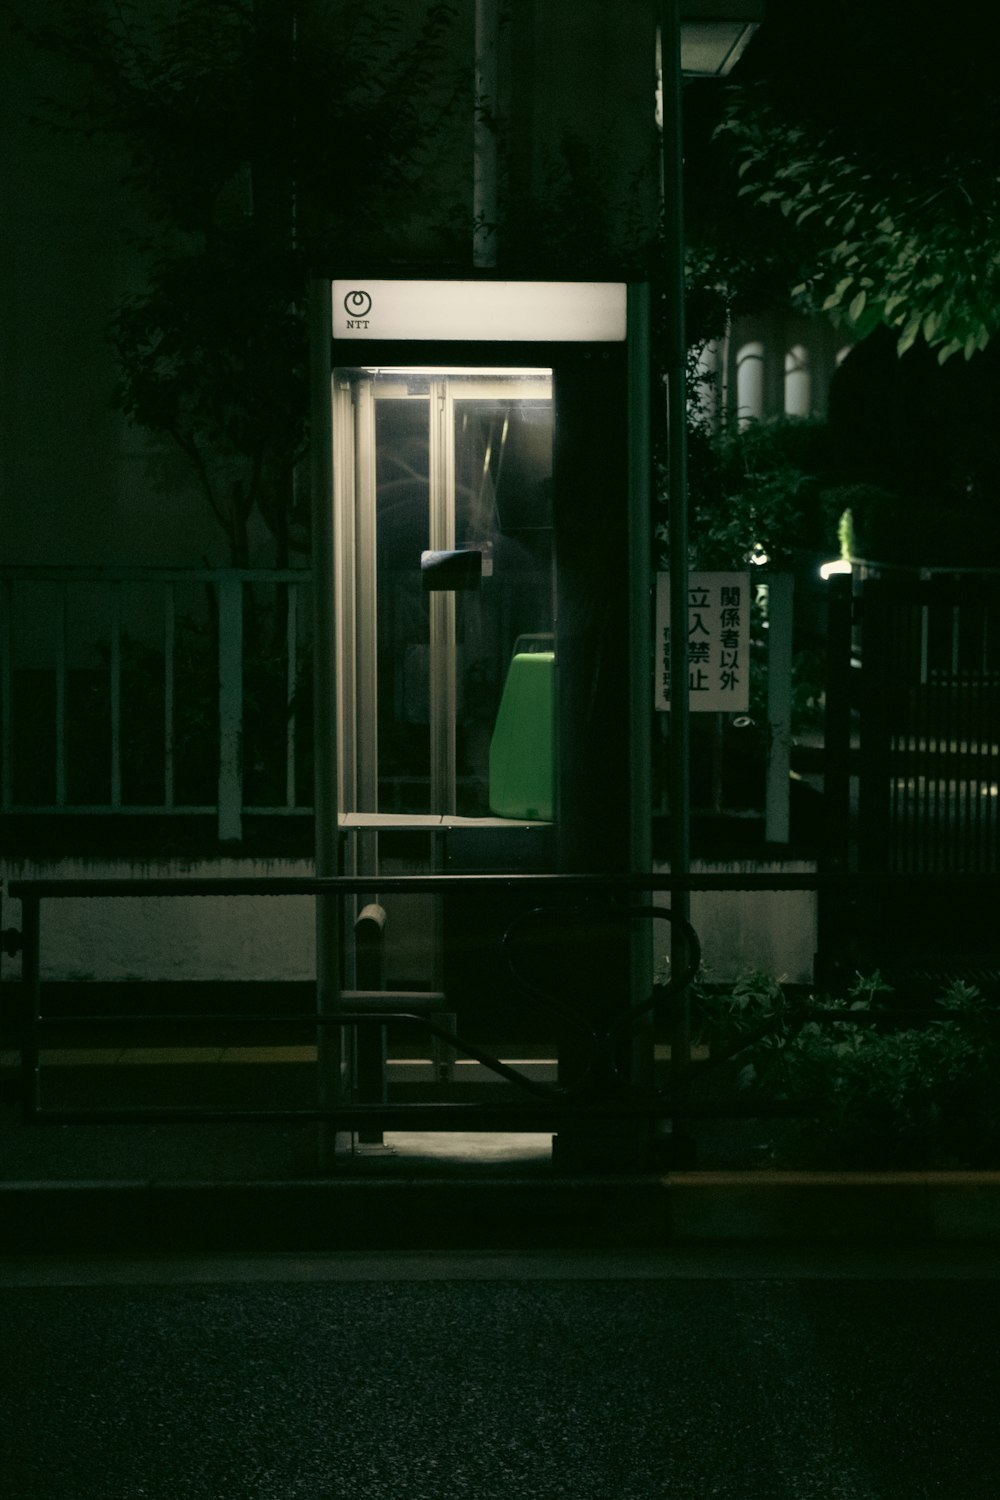 a phone booth on a street